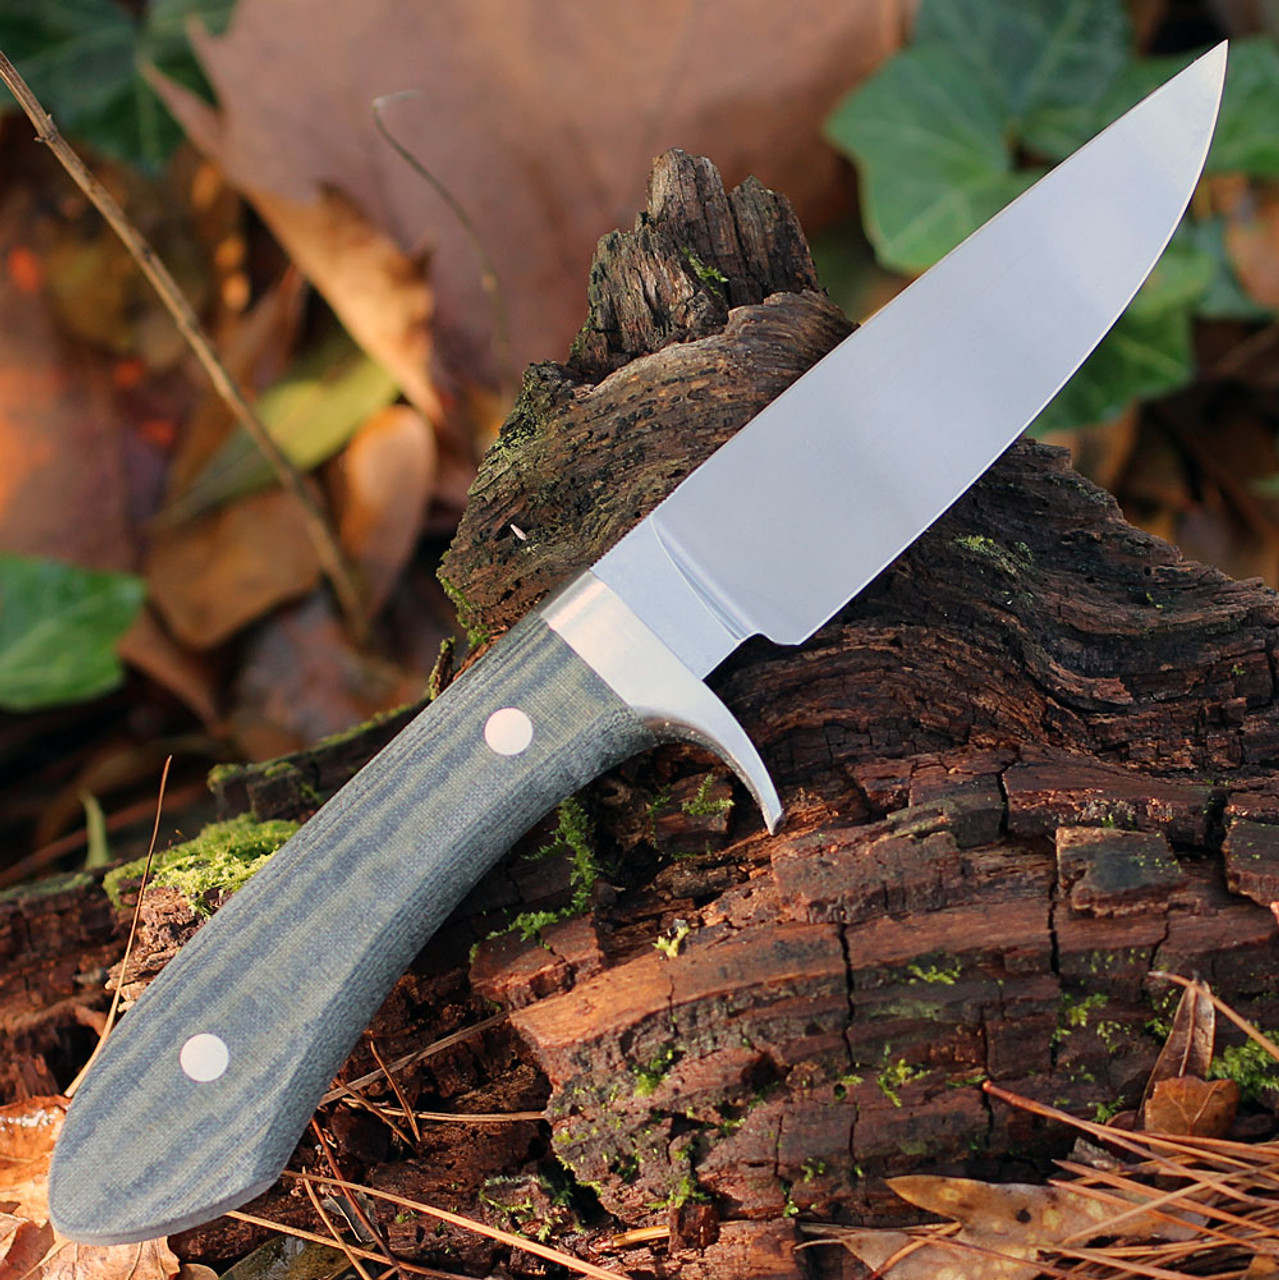 White River Sendero Classic Fixed Blade (WRJF-SC-LBO) - 4.4in CPM-S35VN Stonewash Drop Point Plain Blade, Black and Olive Drab Linen Micarta Handle - Leather Sheath